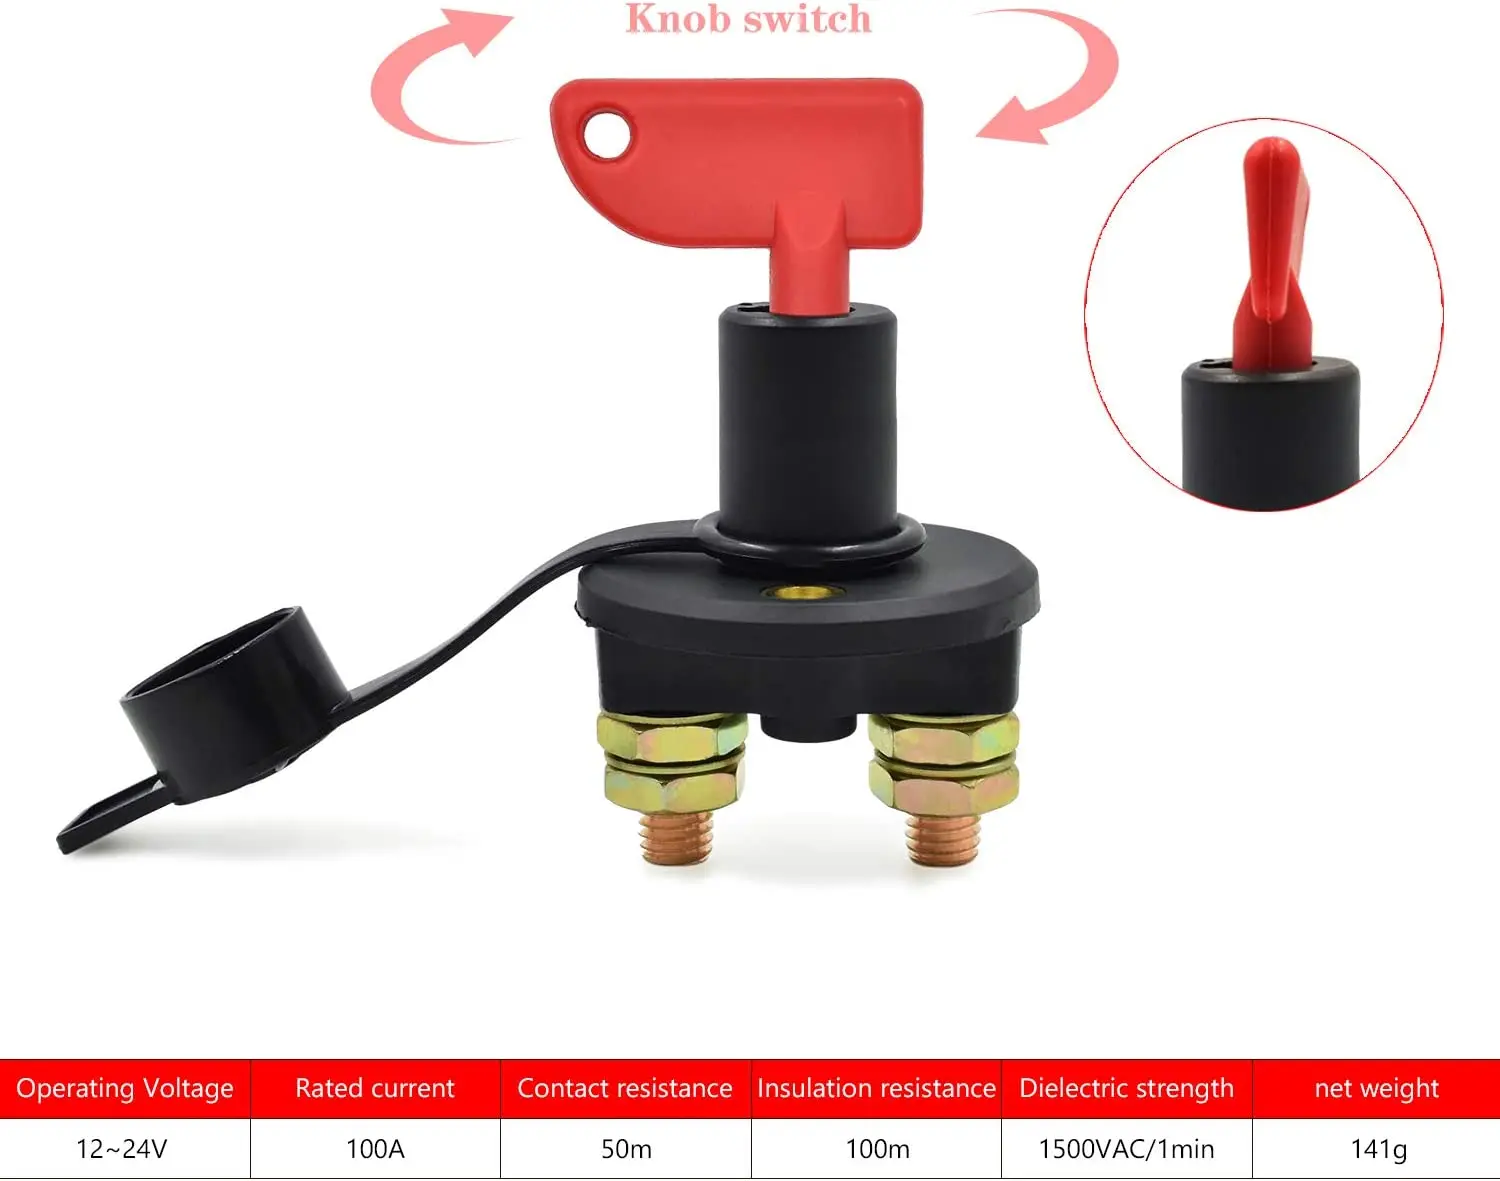 Kill Switch for Car, 12V 260A Remote Battery Disconnect Switch